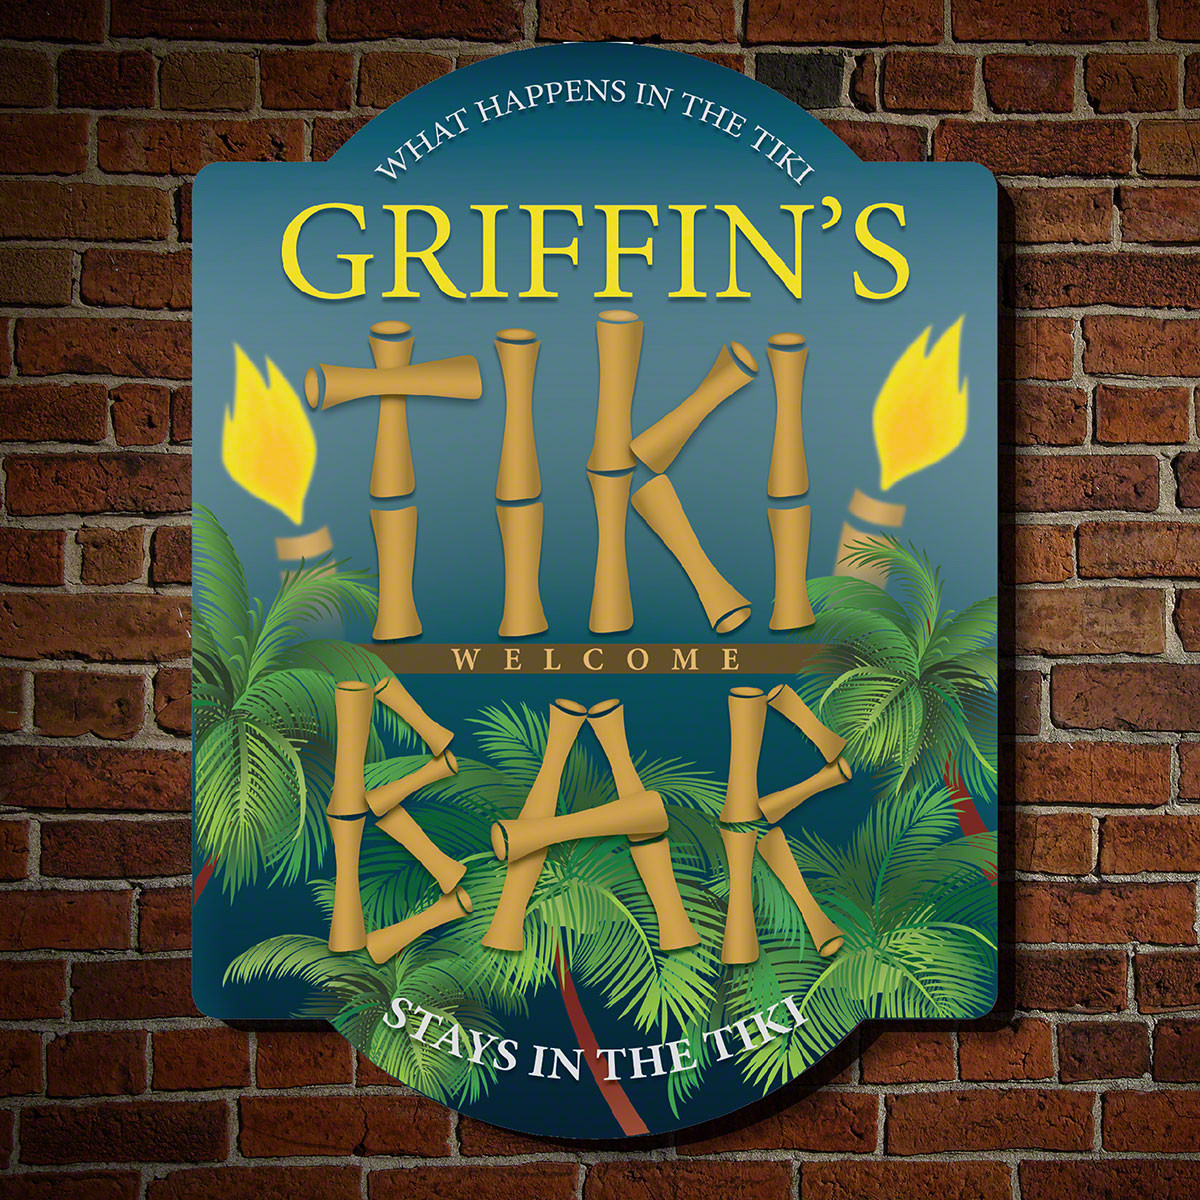 When the sun is setting in the sky, everybody knows it's party time! Especially when you welcome them to your home with our Island Nights personalized tiki bar sign. Featuring a dusk-blue sky lit by fiery tiki torches, this personalized sign for home is a #bar